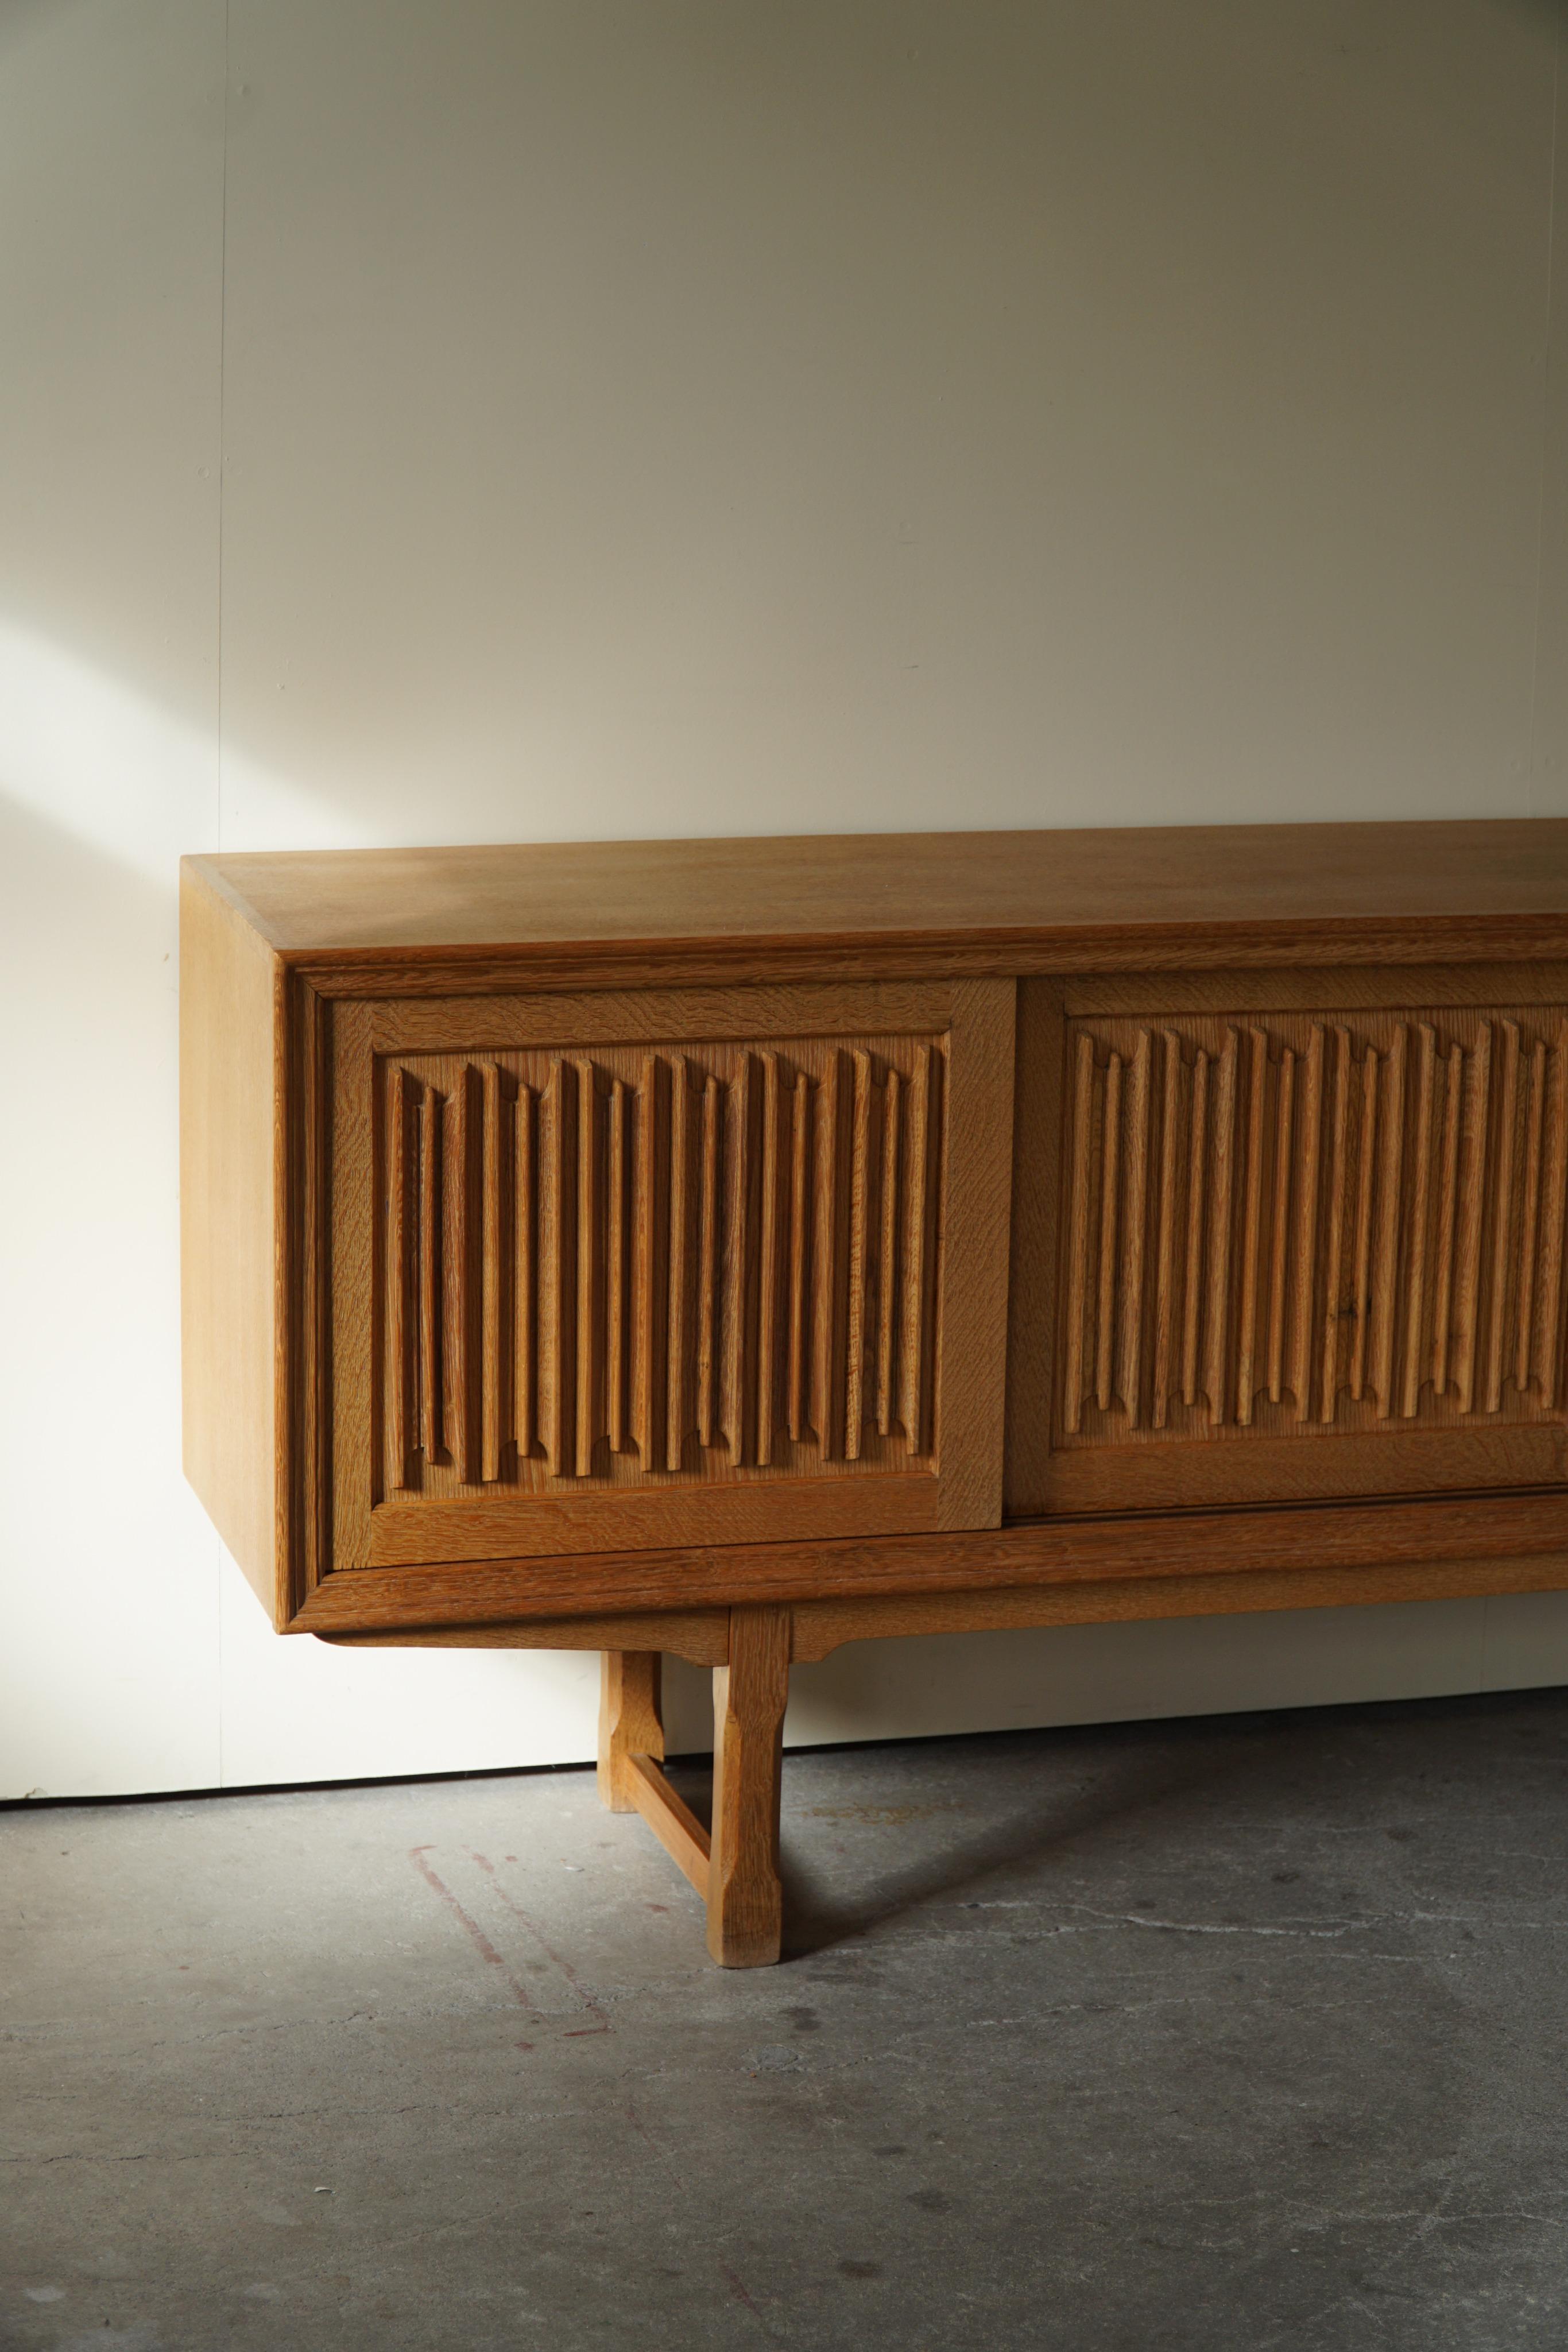 Hand-Crafted Midcentury Sculptural Sideboard in Oak, Made by a Danish Cabinetmaker, 1960s